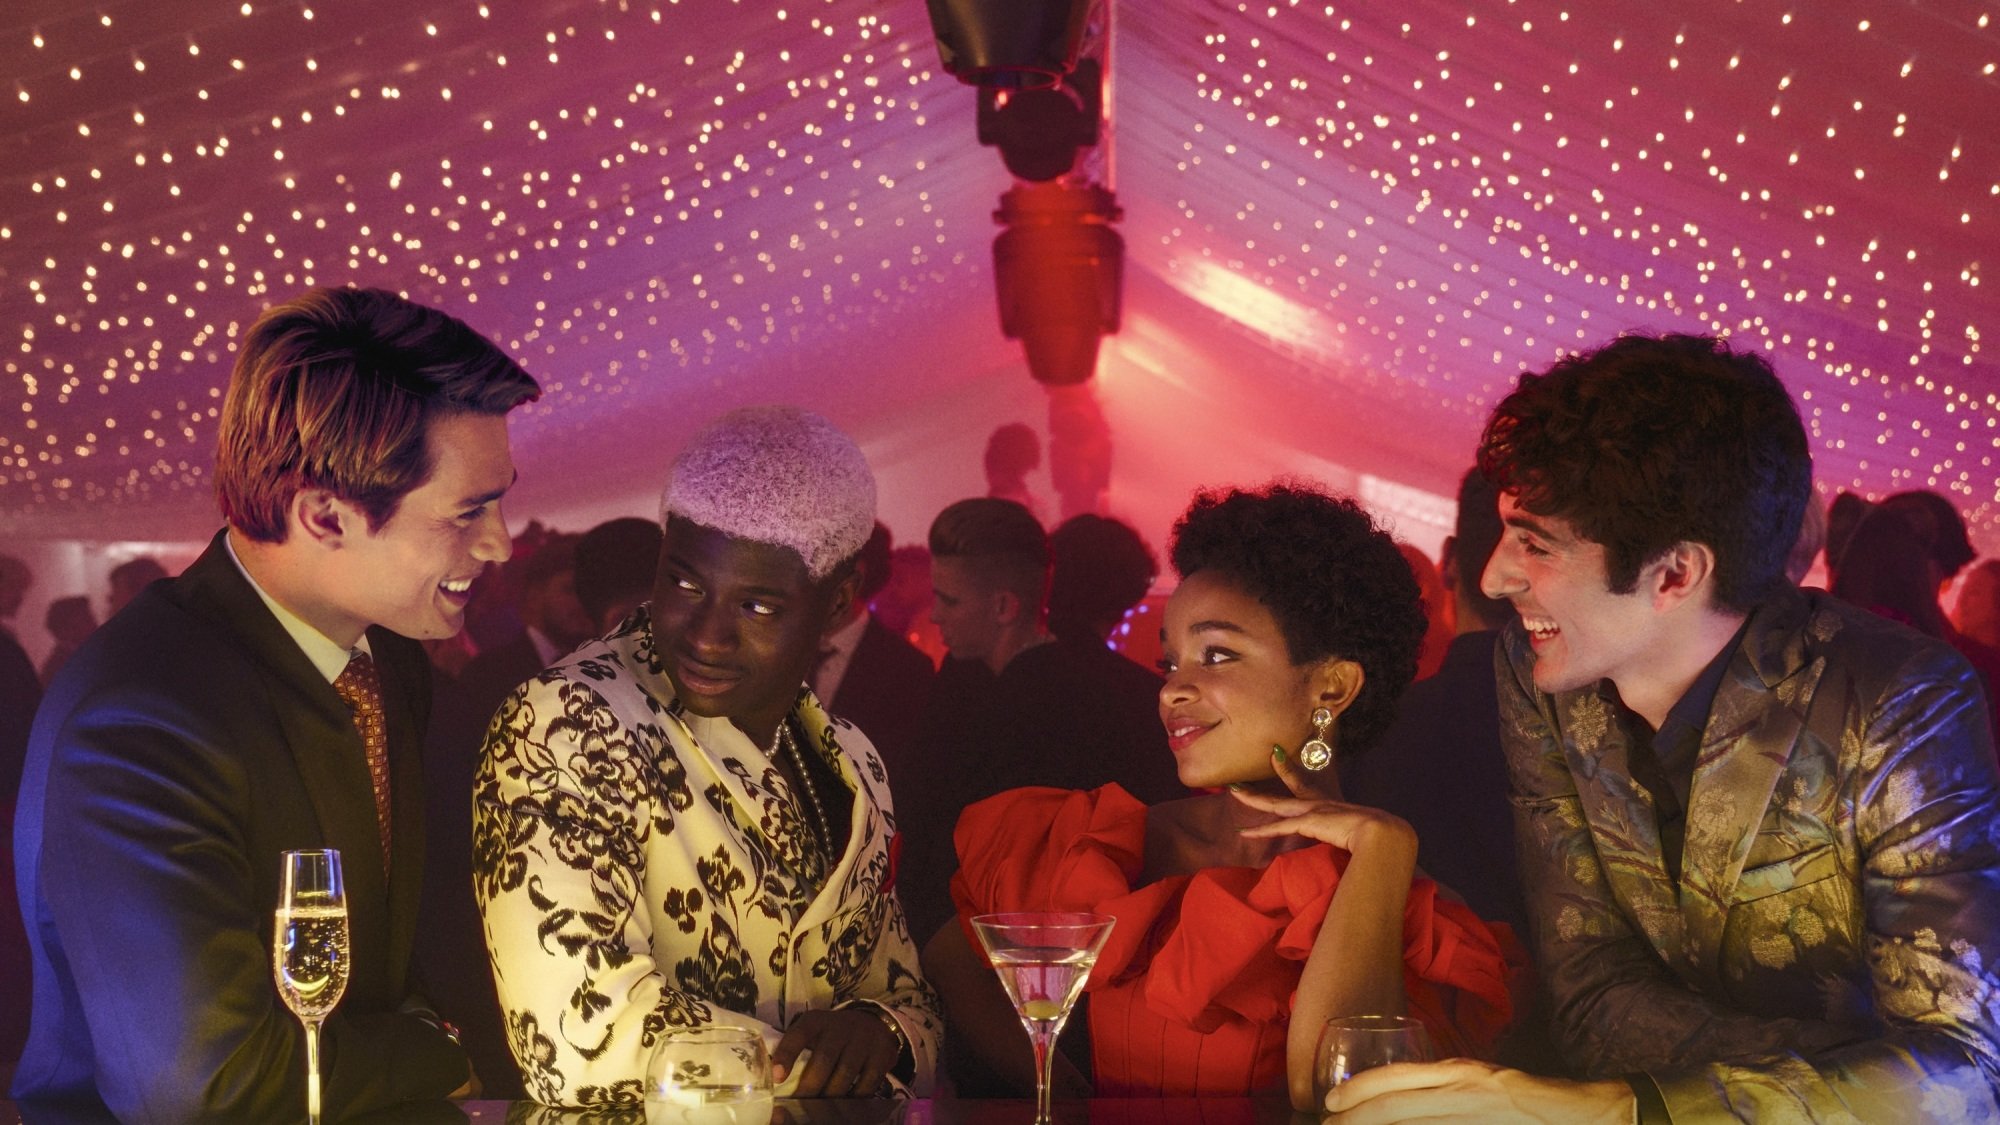 A group of four lavishly dressed men and woman hang out at a bar under a tent lit with red lights; a party rages behind them.